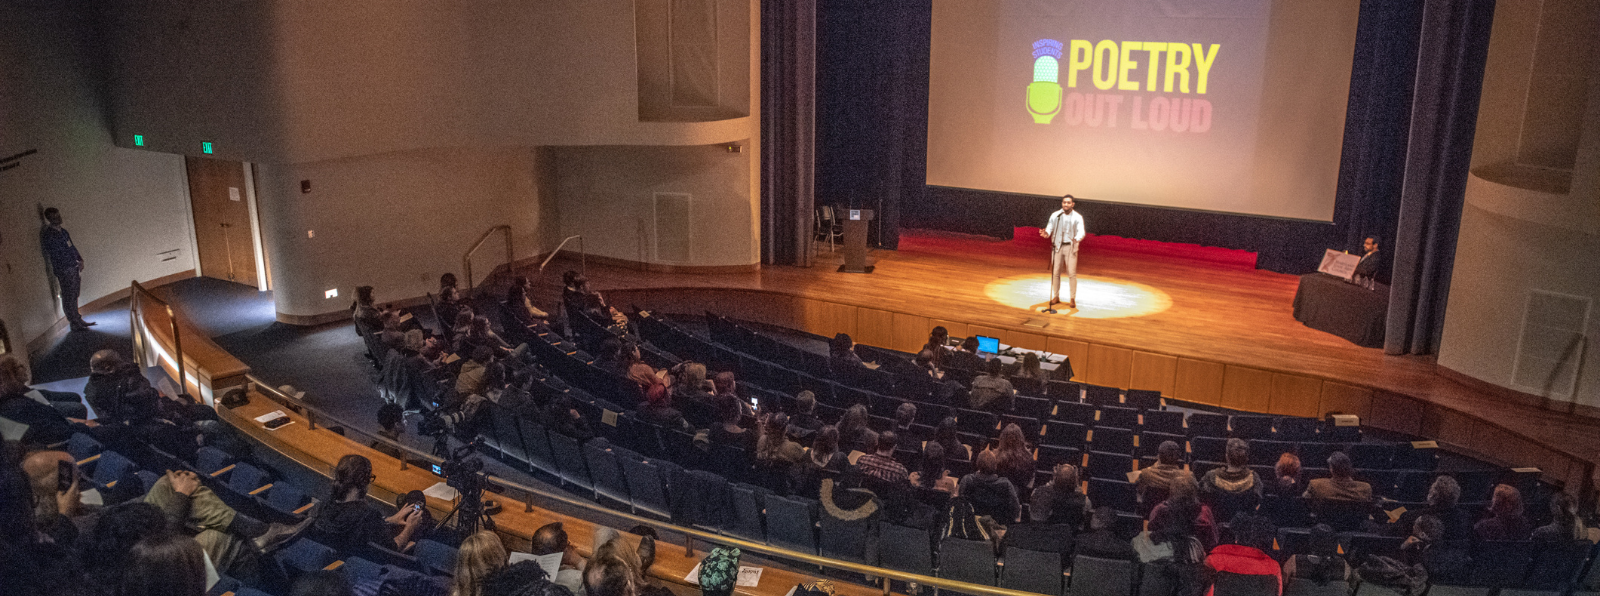 An auditorium full of people are watching a person on stage. “Poetry Out Loud" is projected behind the stage.